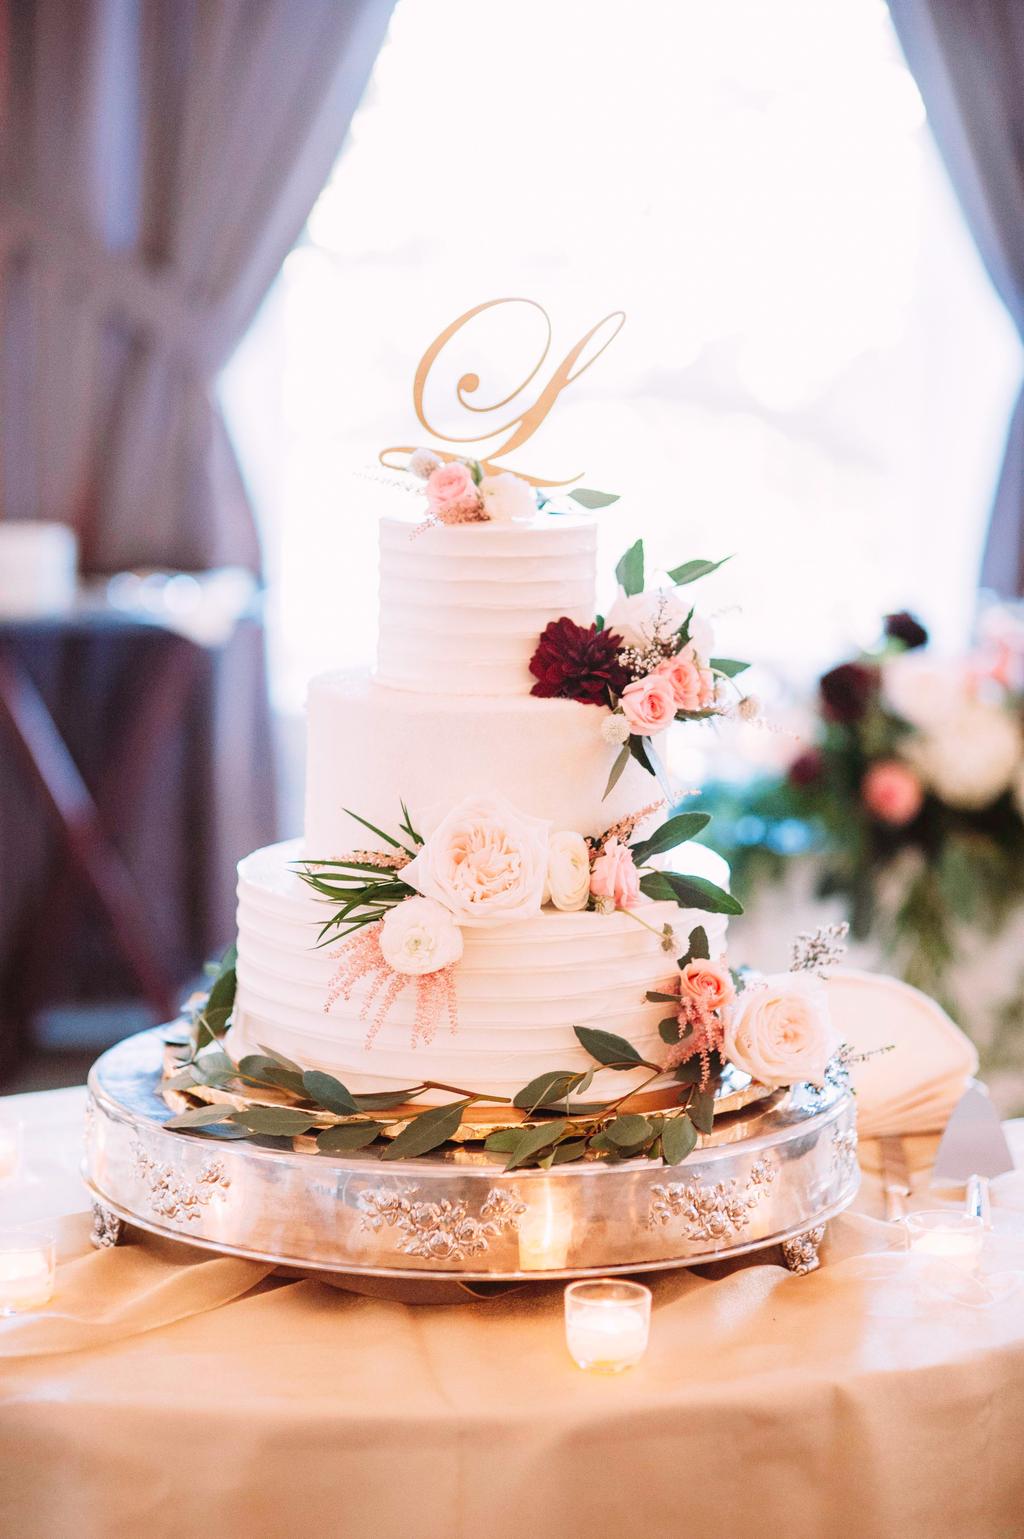 DESSERTS Your wedding cake is the exclamation point on the reception and it should be a total reflection of your style and taste.